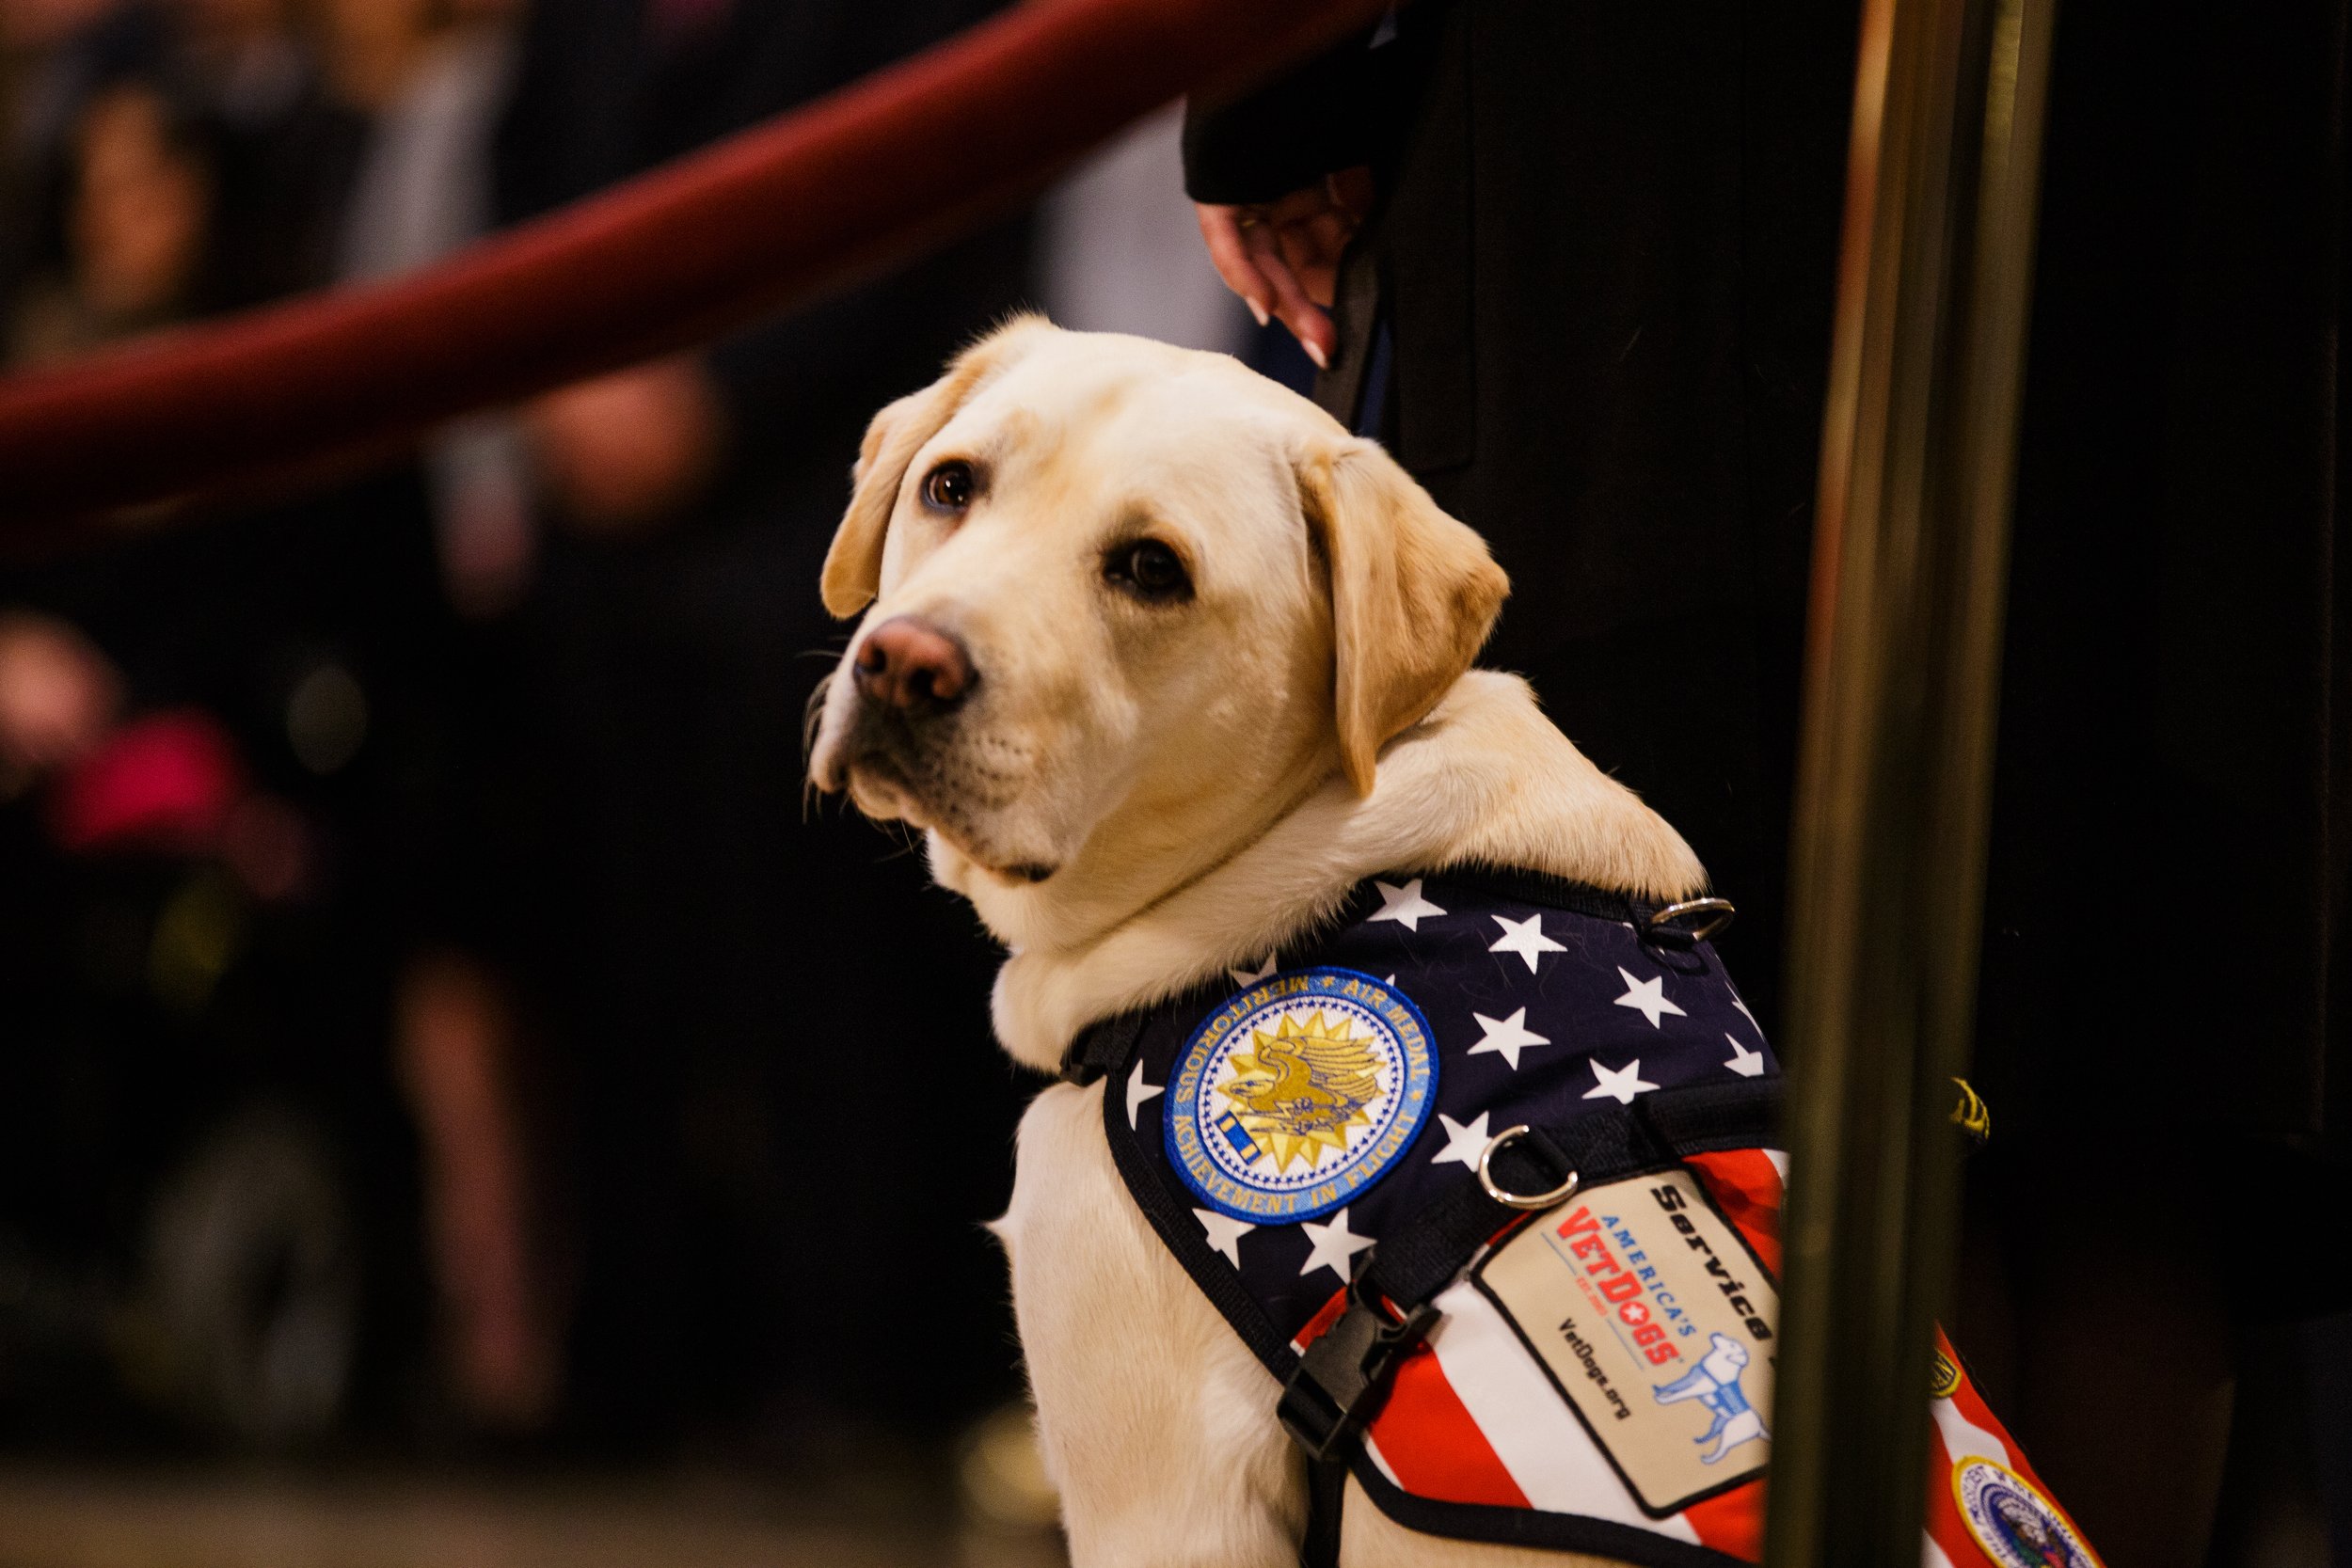  Sully, President George H.W. Bush’s service dog pays a visit to his casket in the Capitol Rotunda.    December 2018   